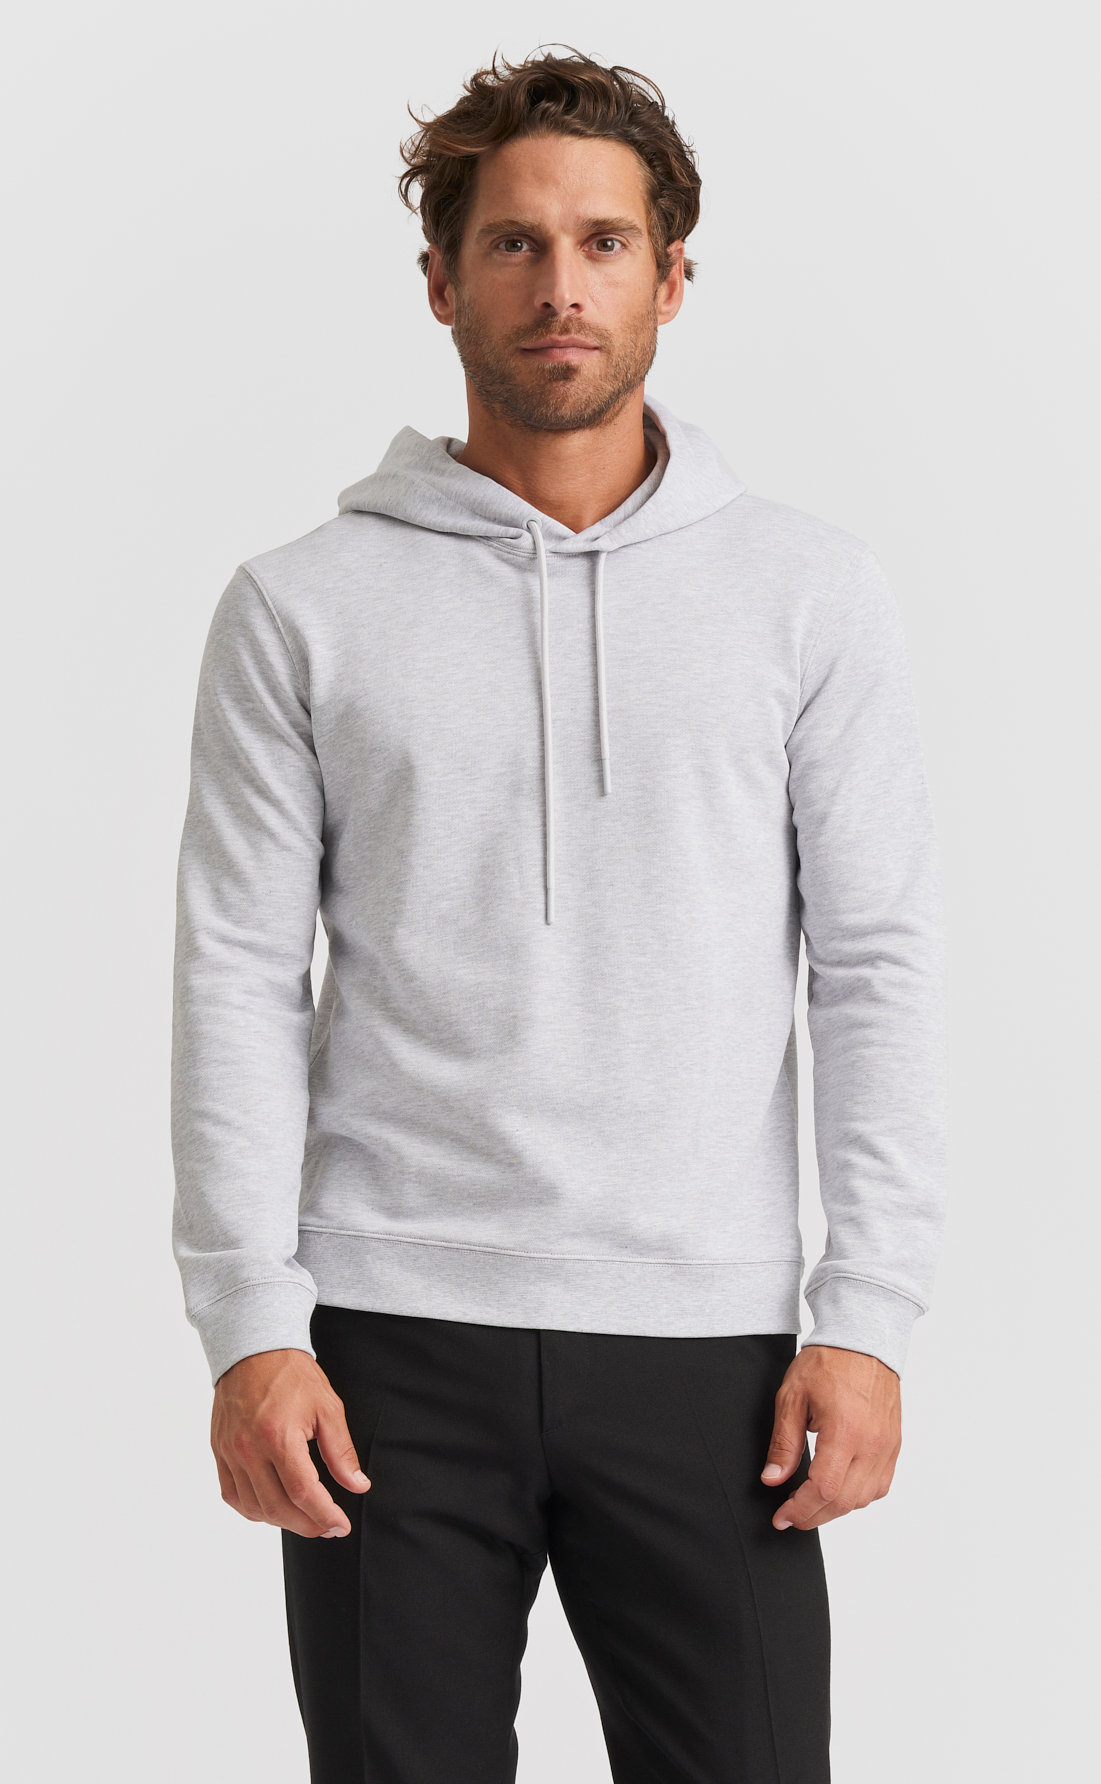 The Cotton Hoodie